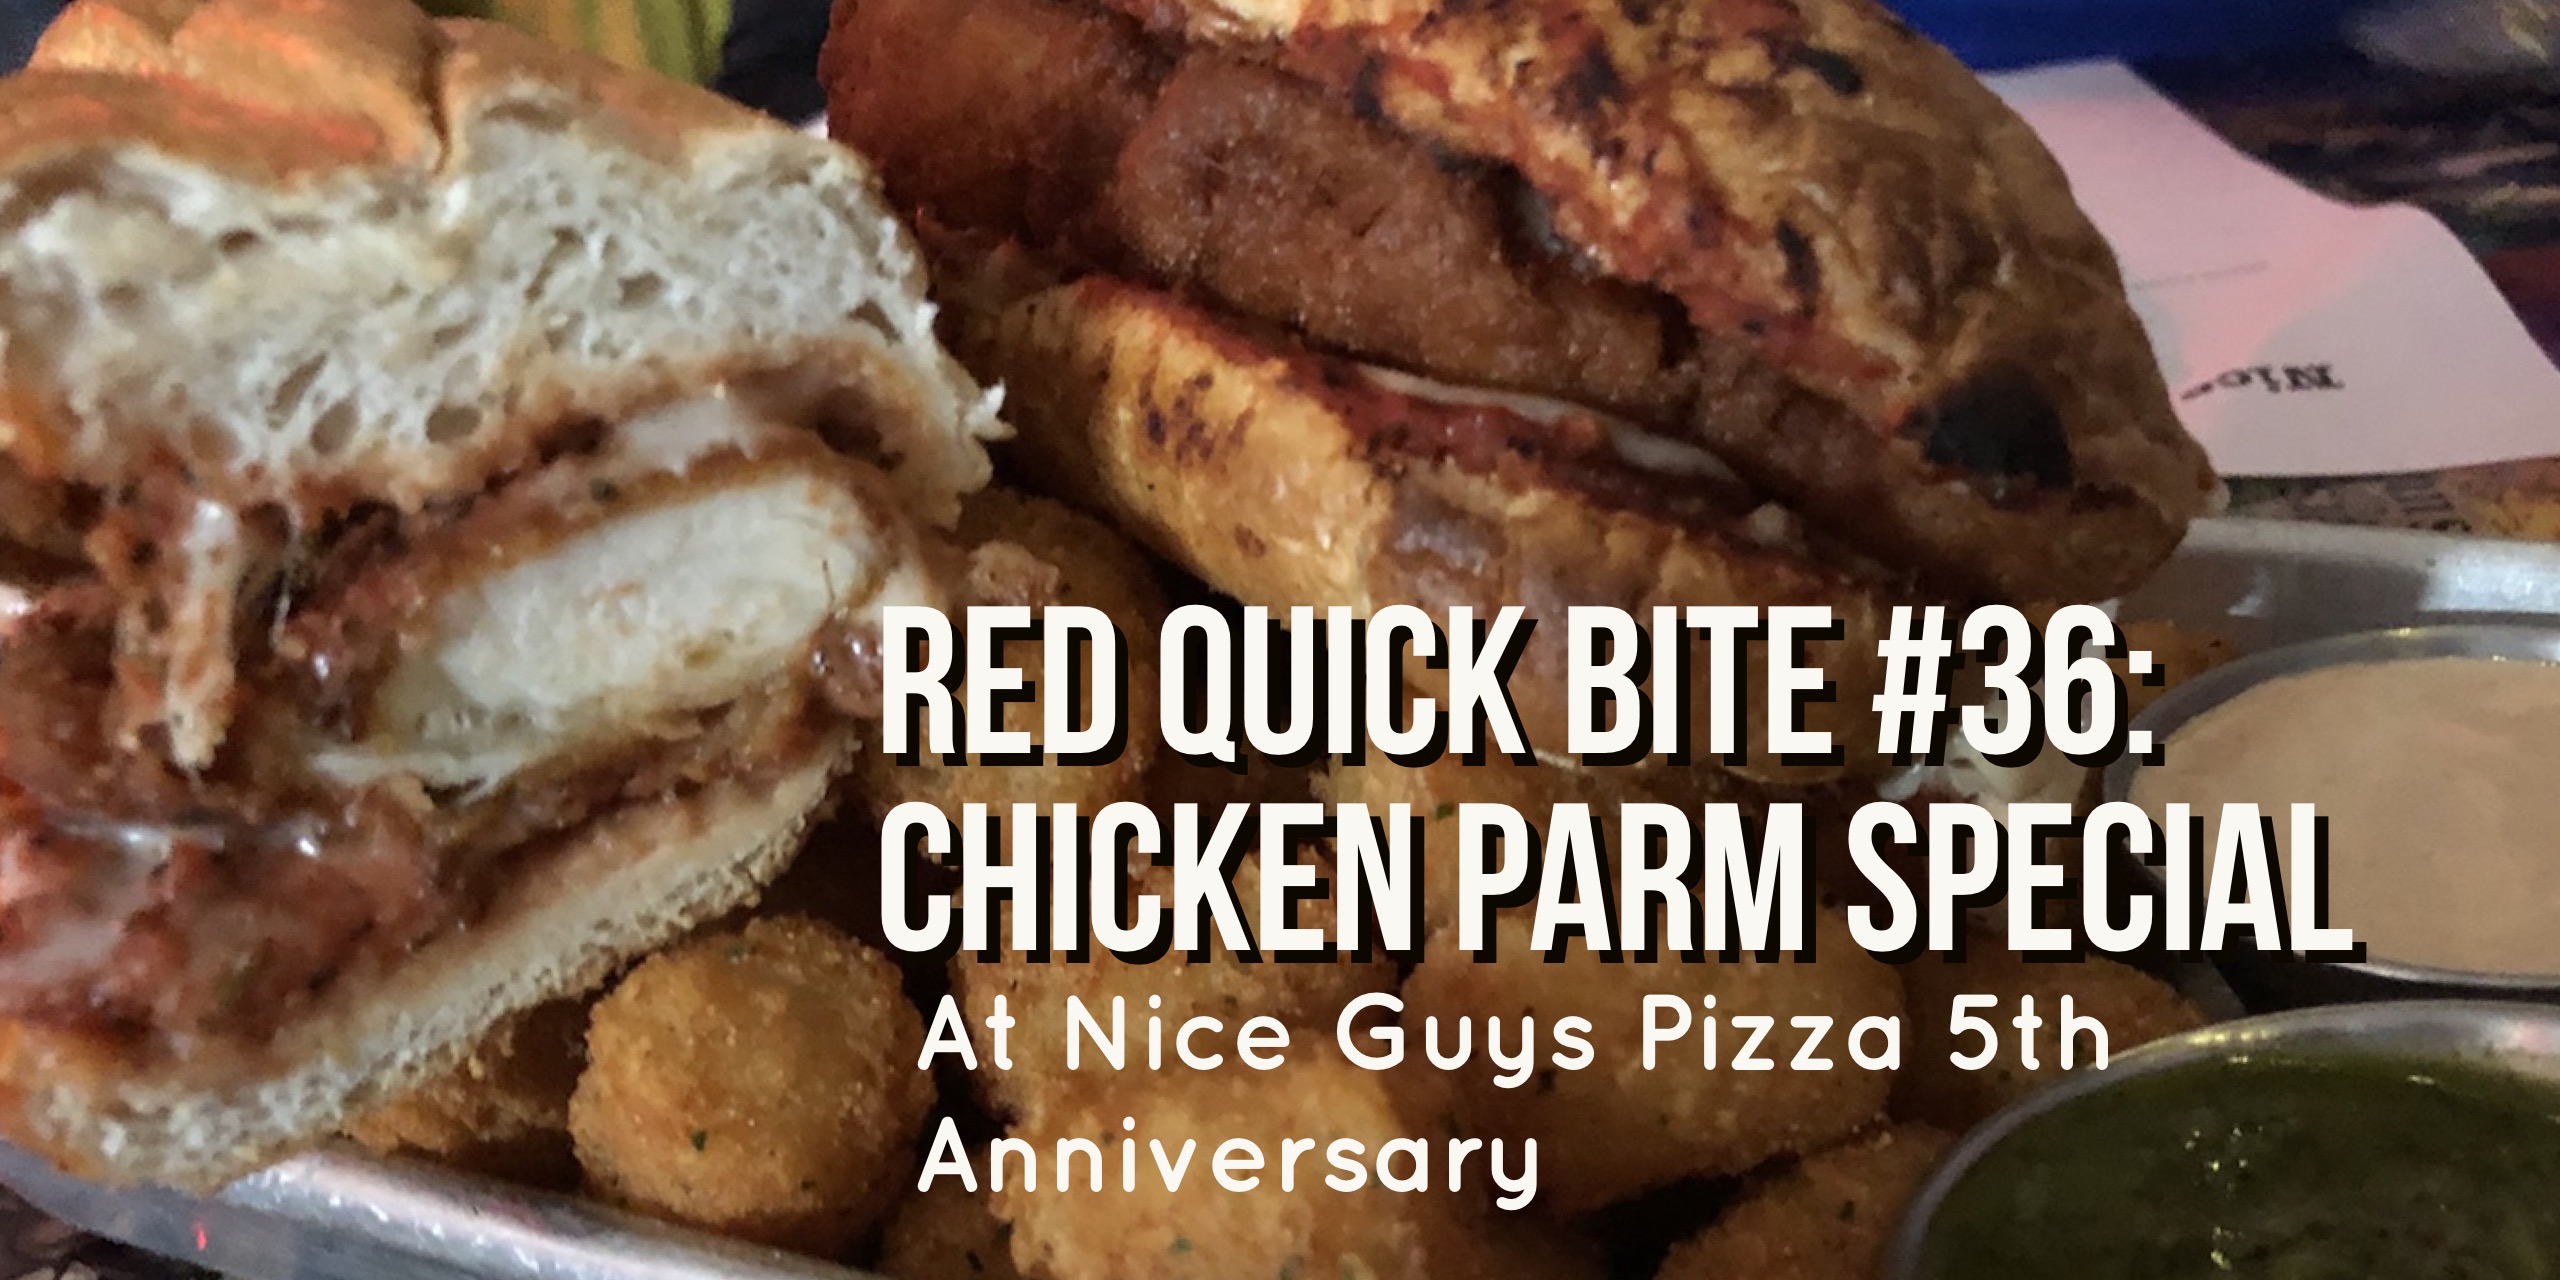 RED Quick Bite #36: Chicken Parm Special at Nice Guys Pizza 5th Anniversary